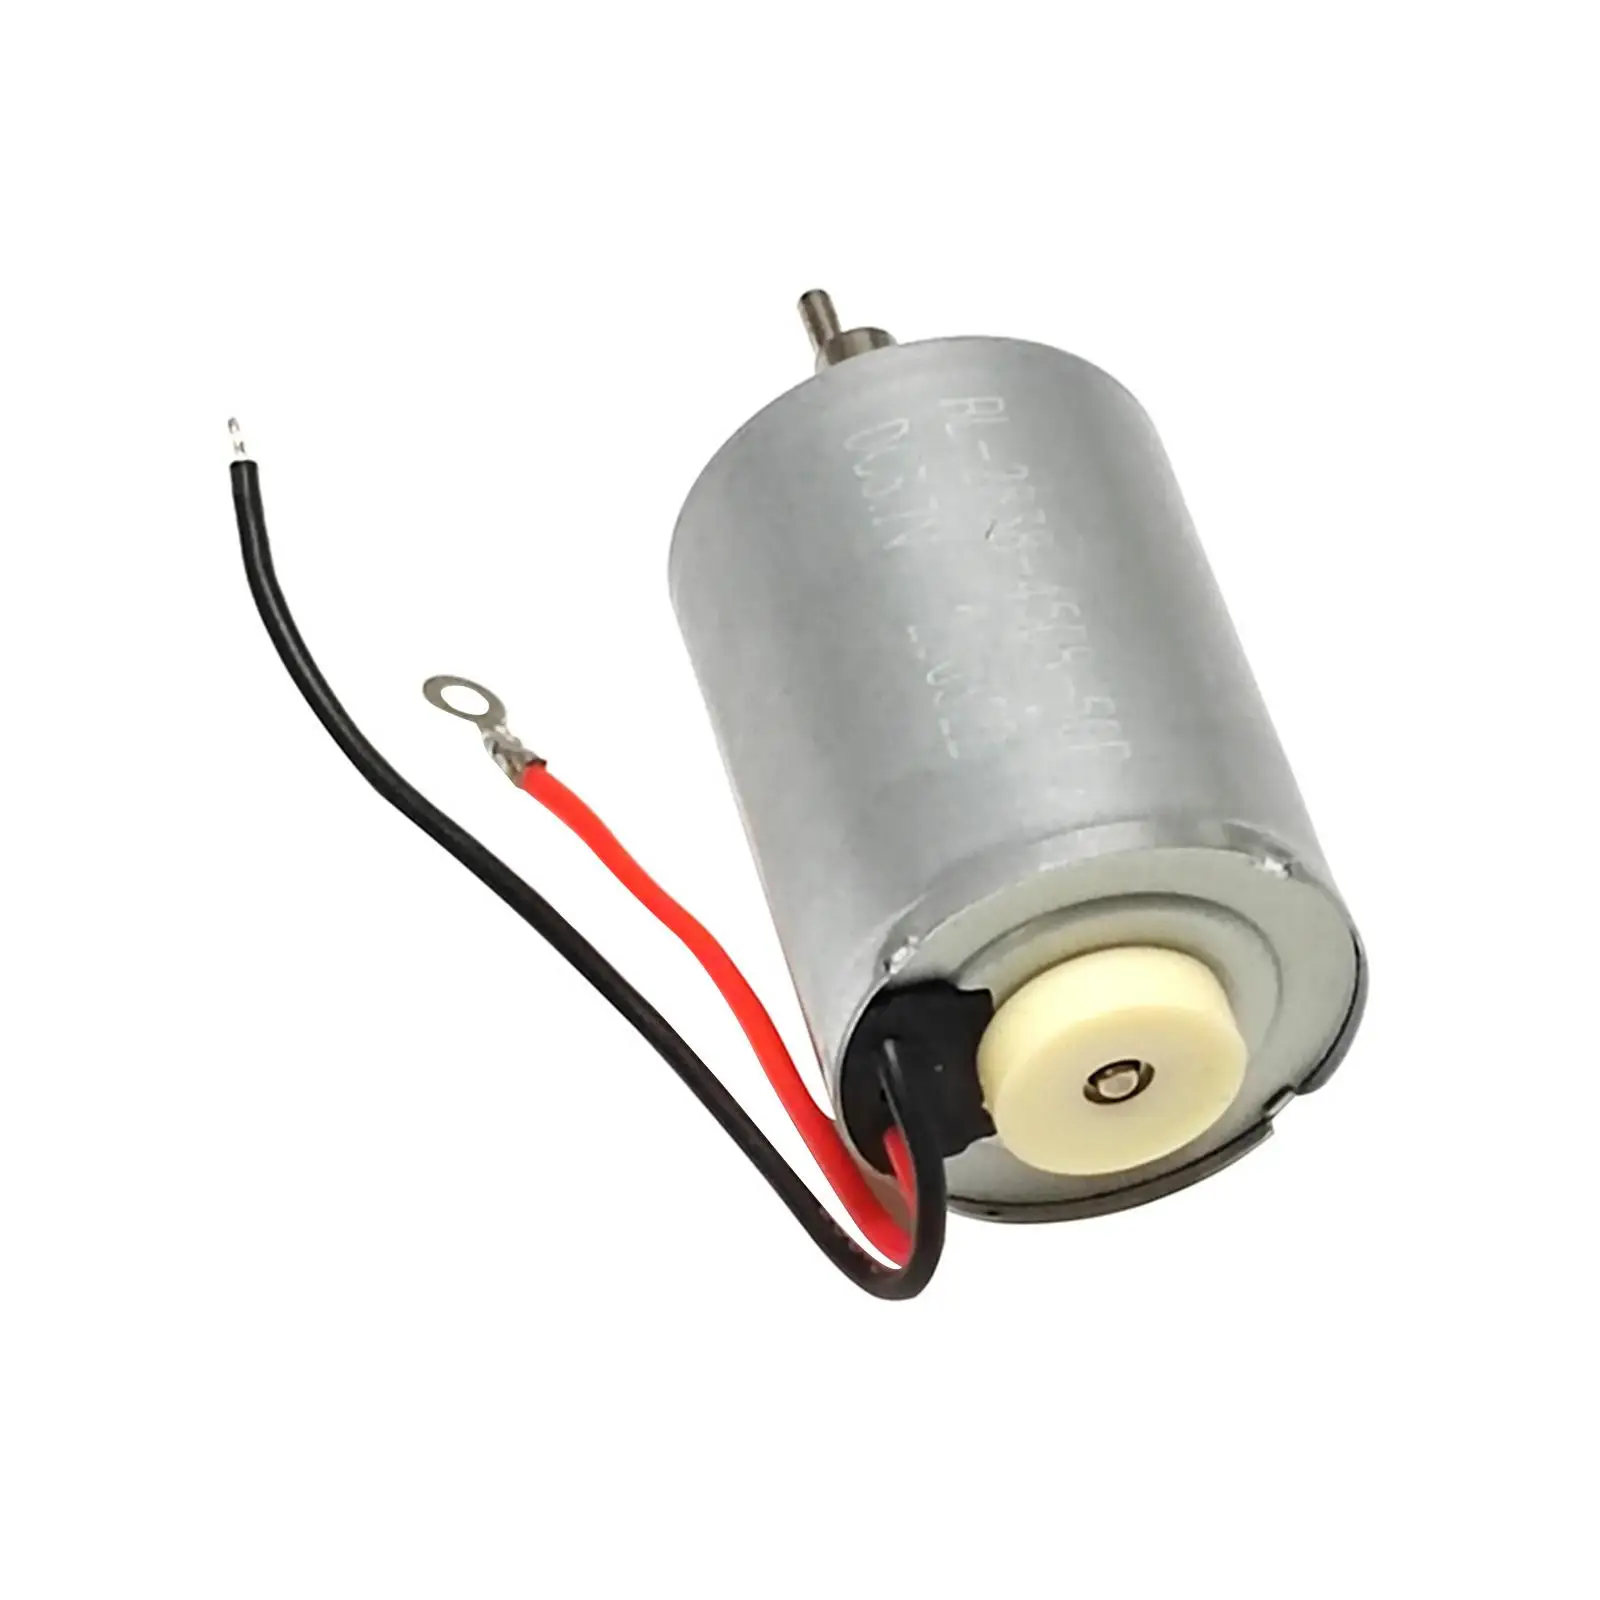 Motor for Hair Clippers Upgrade Maintenance High Performance Repair Parts DC 3.7V Brushless Motor for 8148 8509 1919 8504 8591